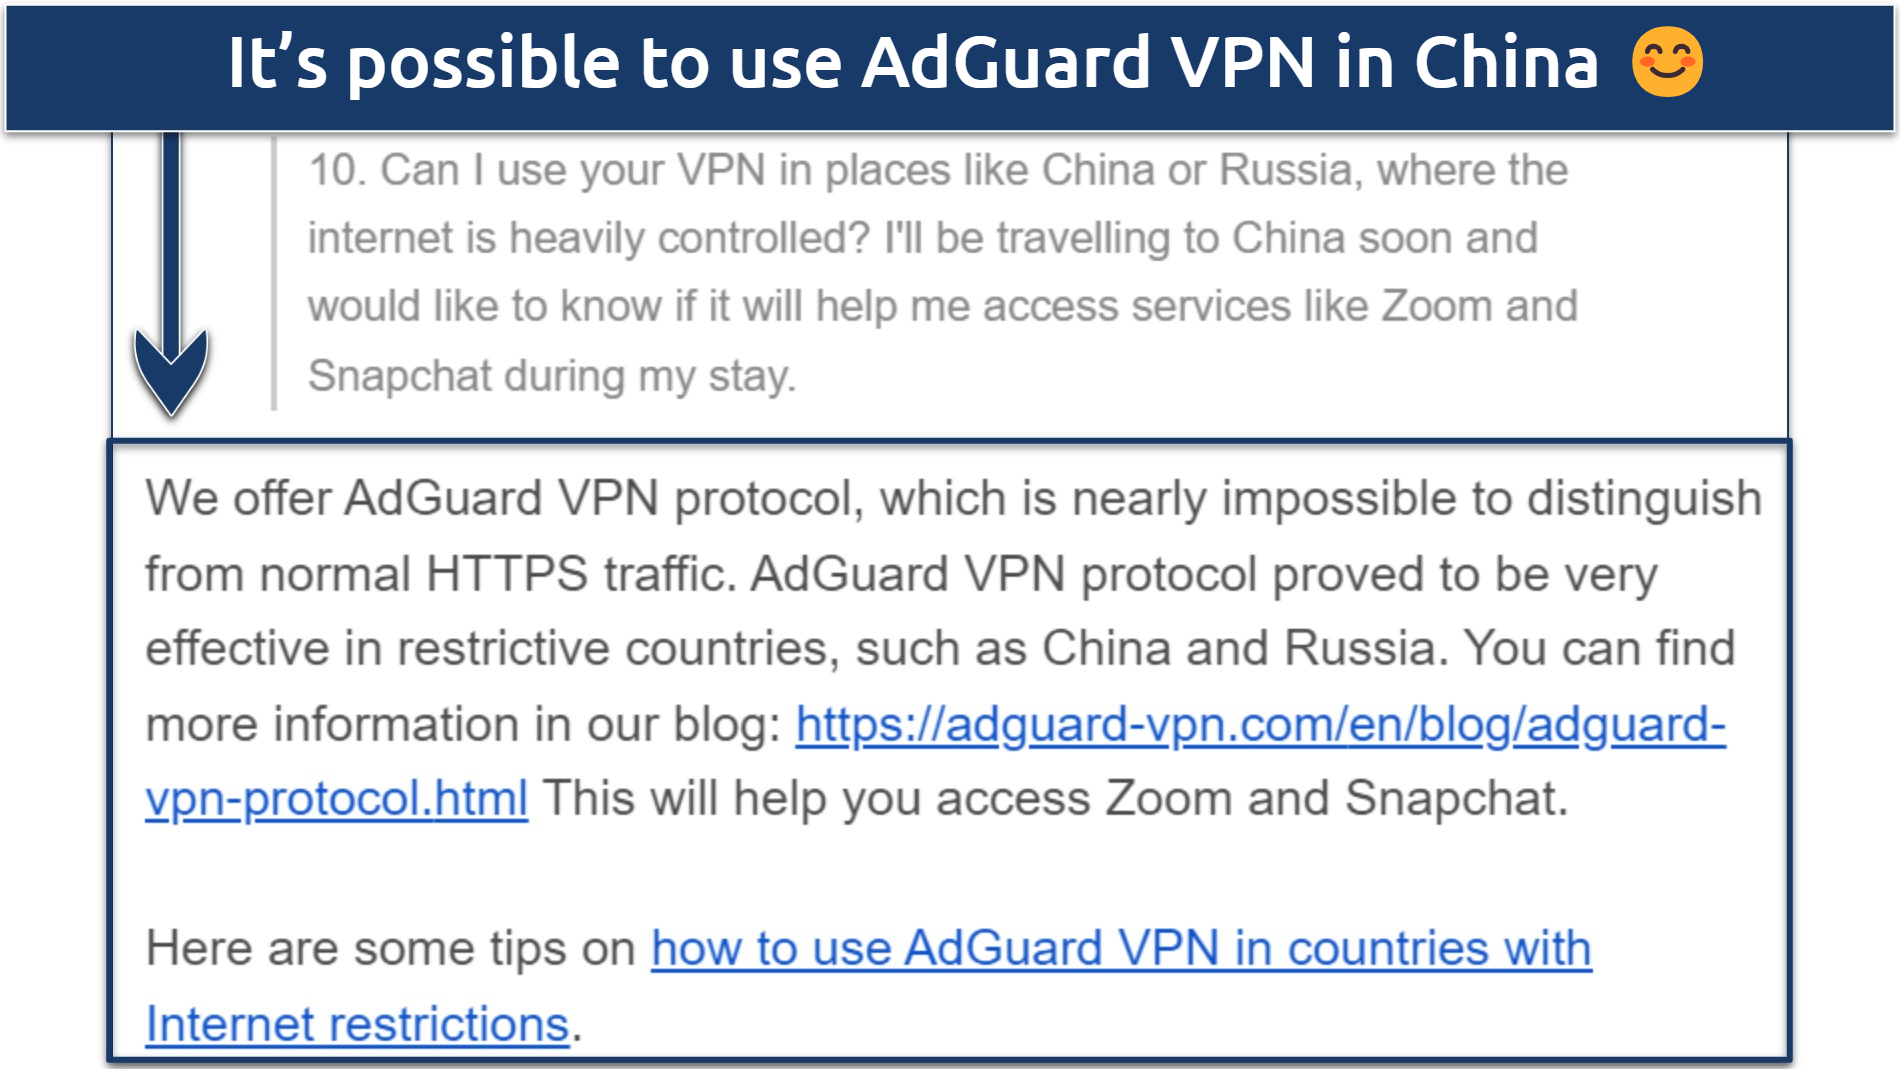 A screenshot showing AdGuard VPN's support team confirming the VPN work in China